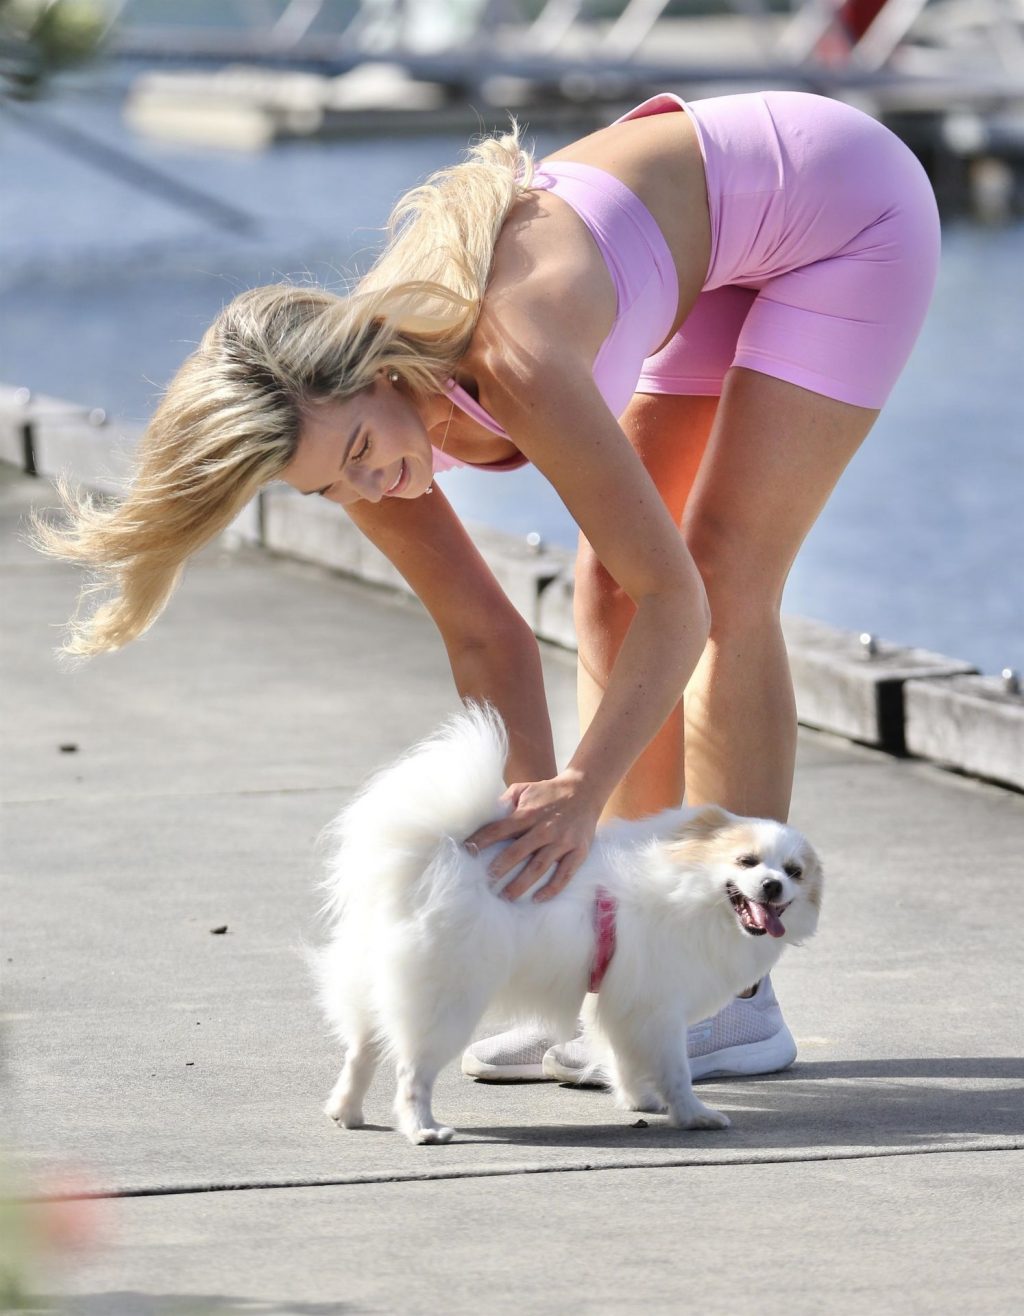 Gemma White is Seen in a Pink Outfit on the Gold Coast (9 Photos)